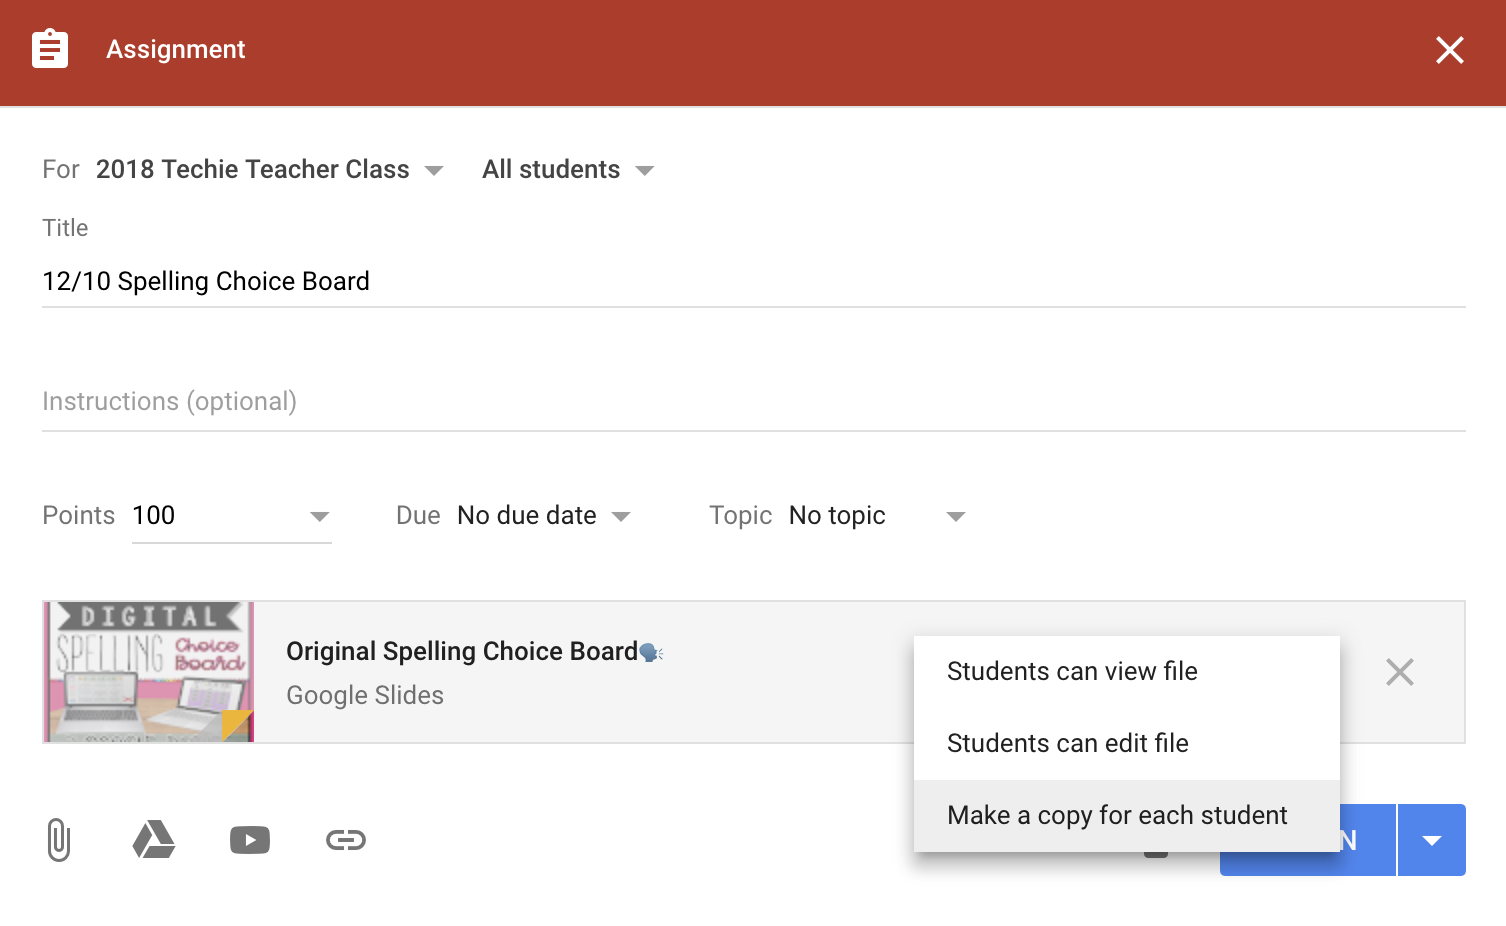 Have you ever wanted to add slides to existing Google Slides presentations your students have already started working on? Come read about the Slip-in-Slide Add-On that is ideal for teachers who use digital notebooks, digital writing journals, digital activities and more that are created in Google Slides! This is a game changer for the Google Classroom.